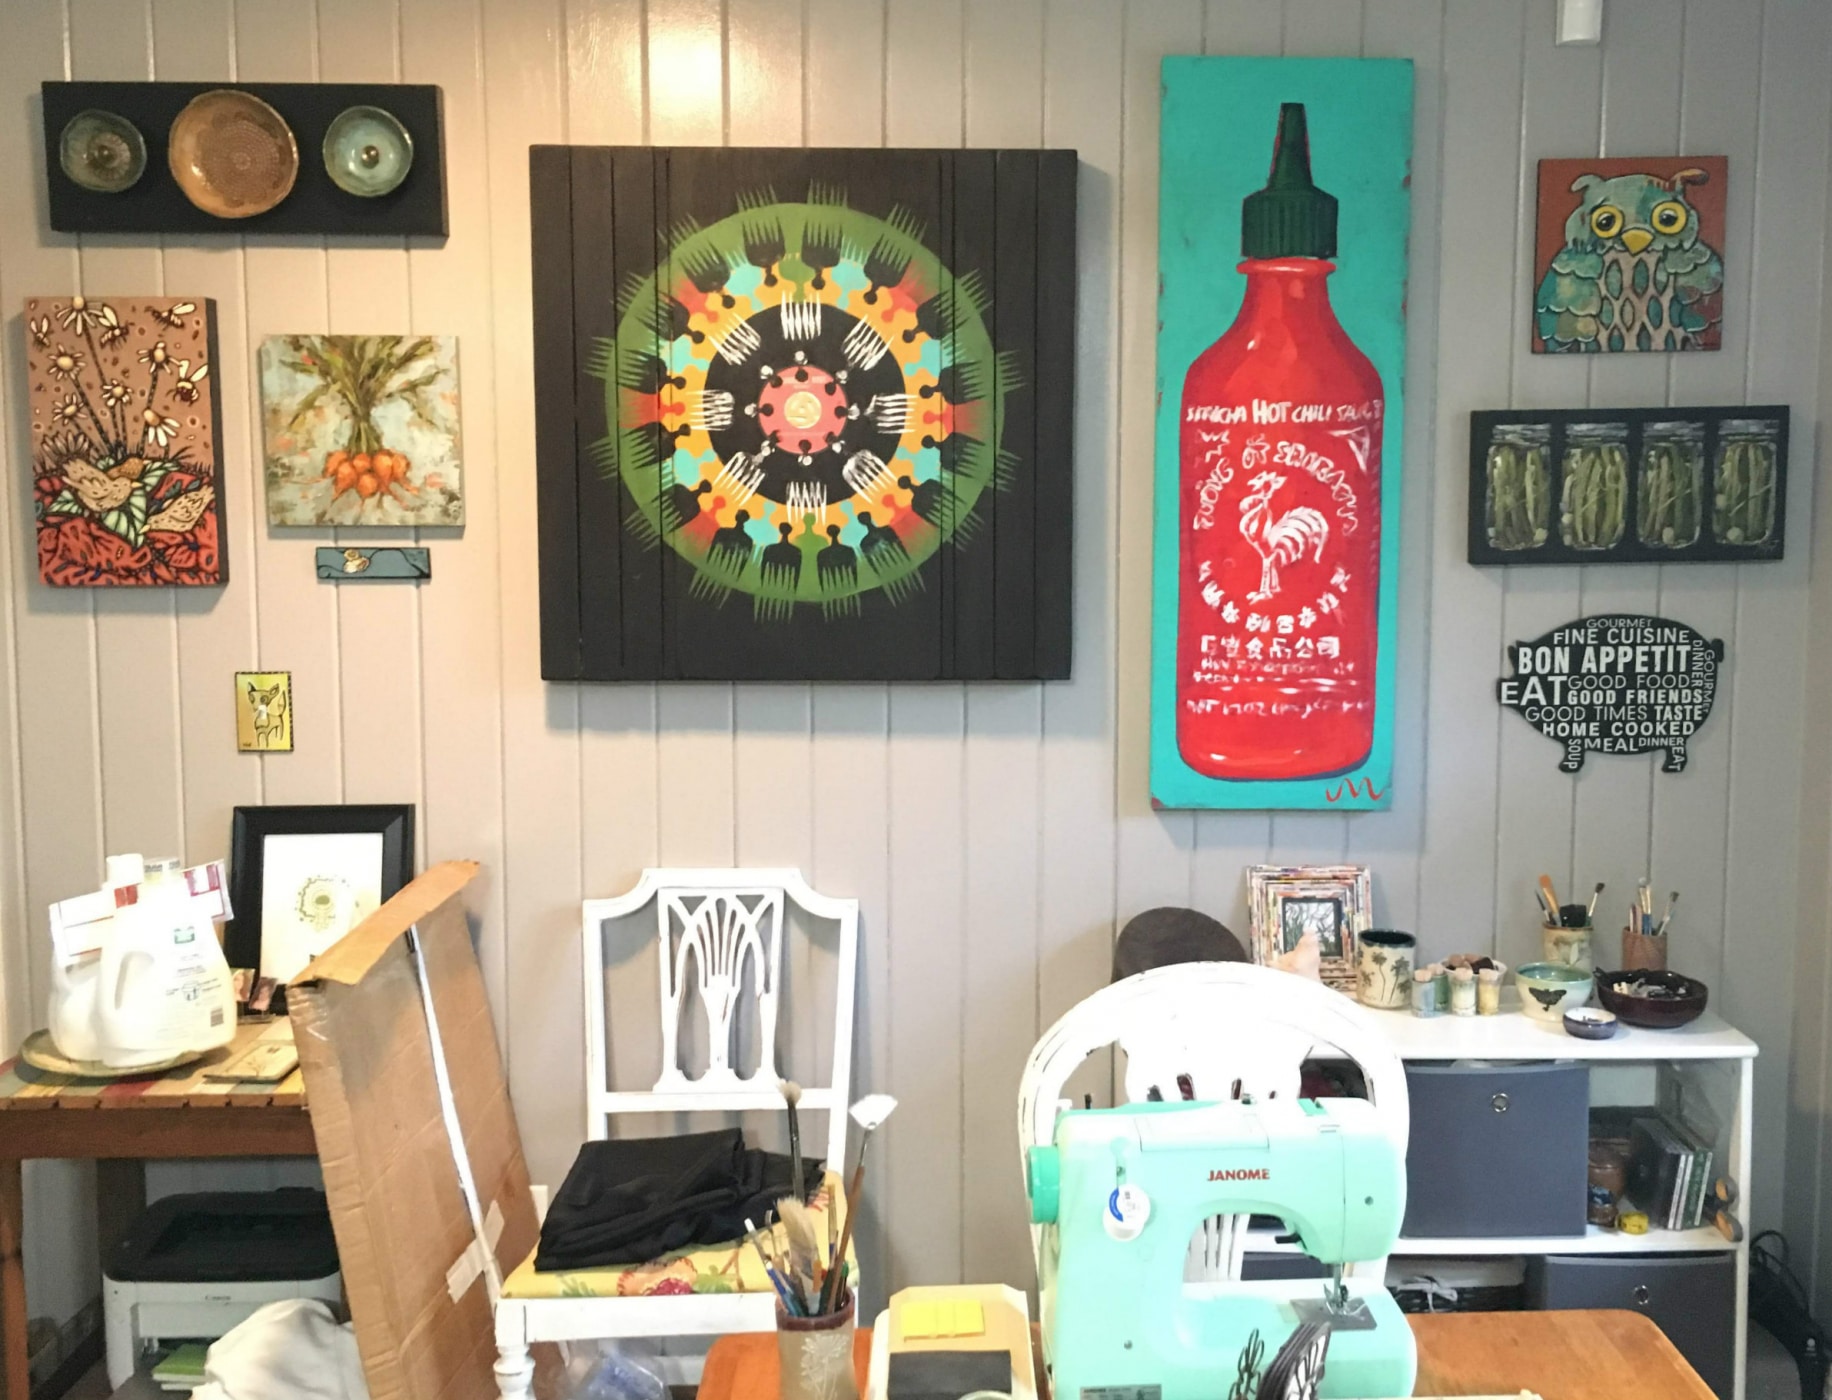 Shelleigh Buckingham, one of the Roebuck Springs potters, has several art walls in her home that feature the work of local Birmingham artists. 